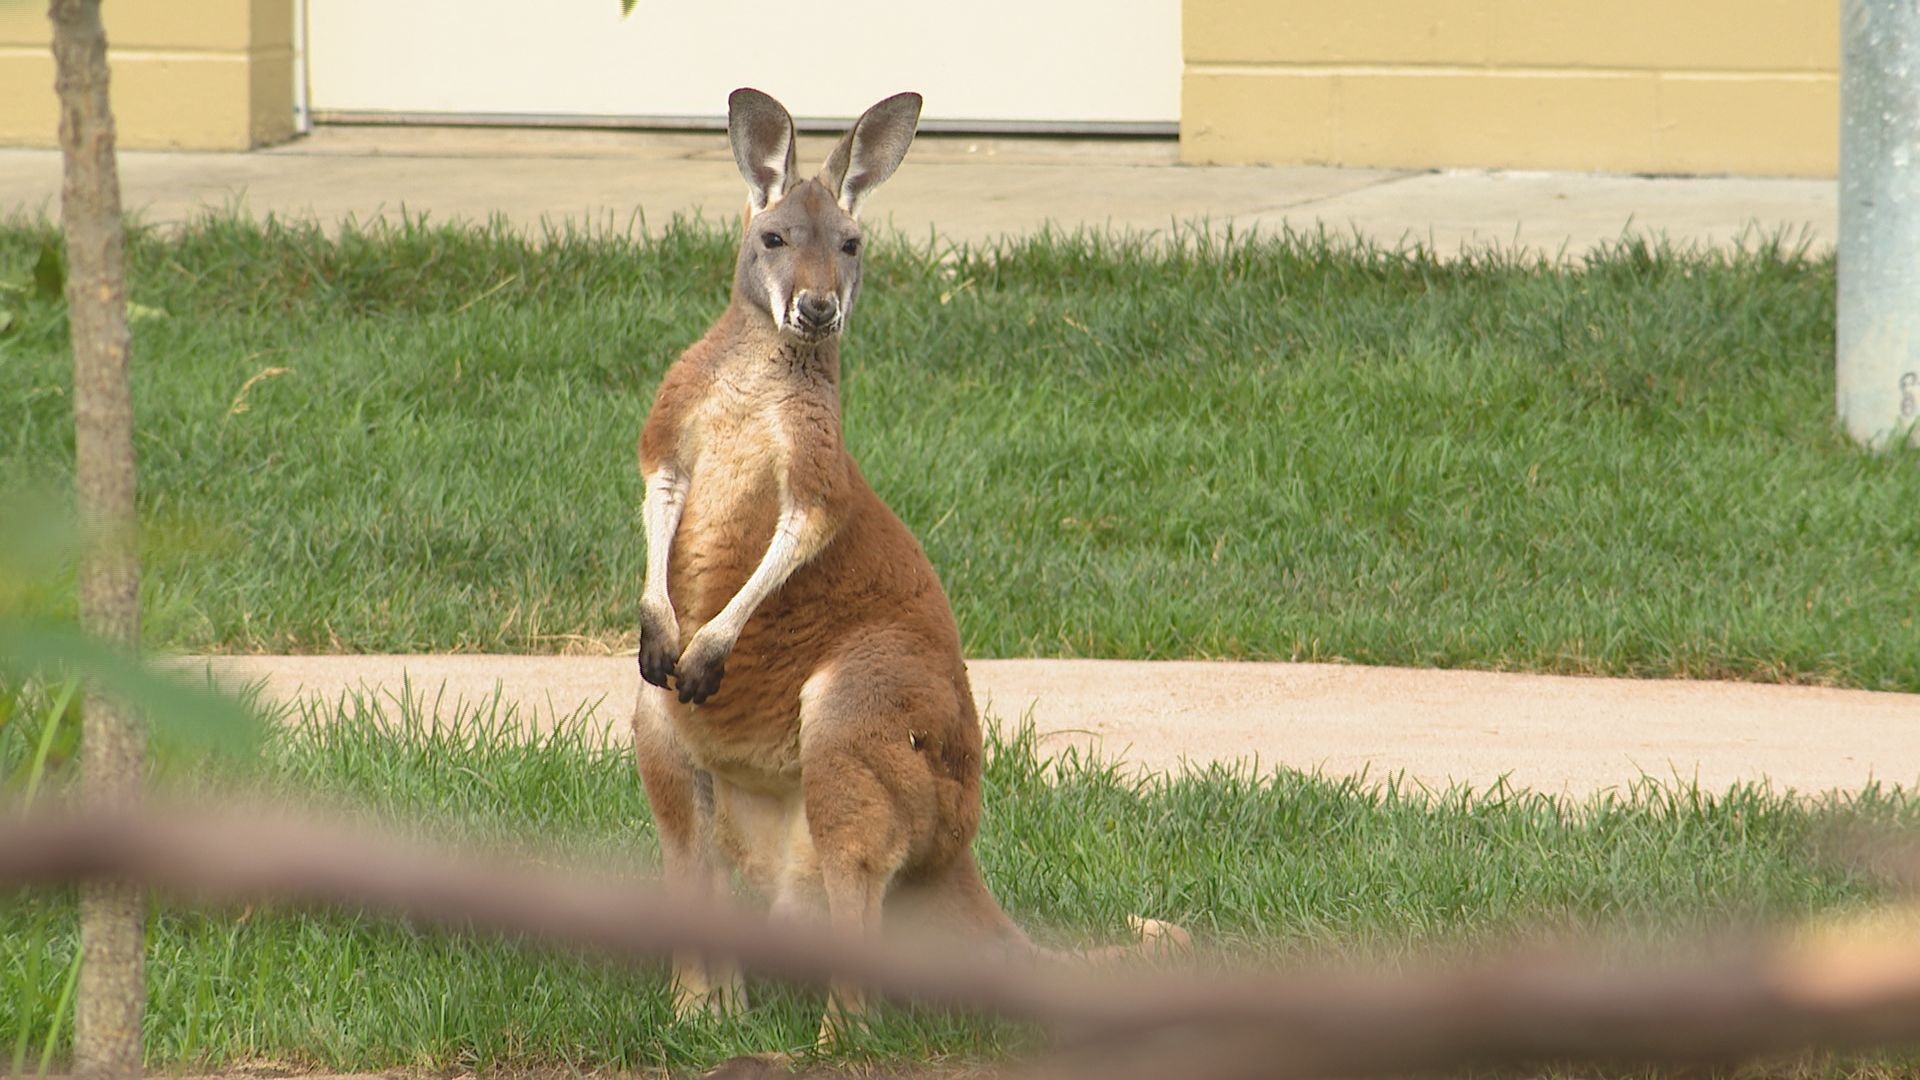 This is the first time the zoo has had kangaroos since 2009.